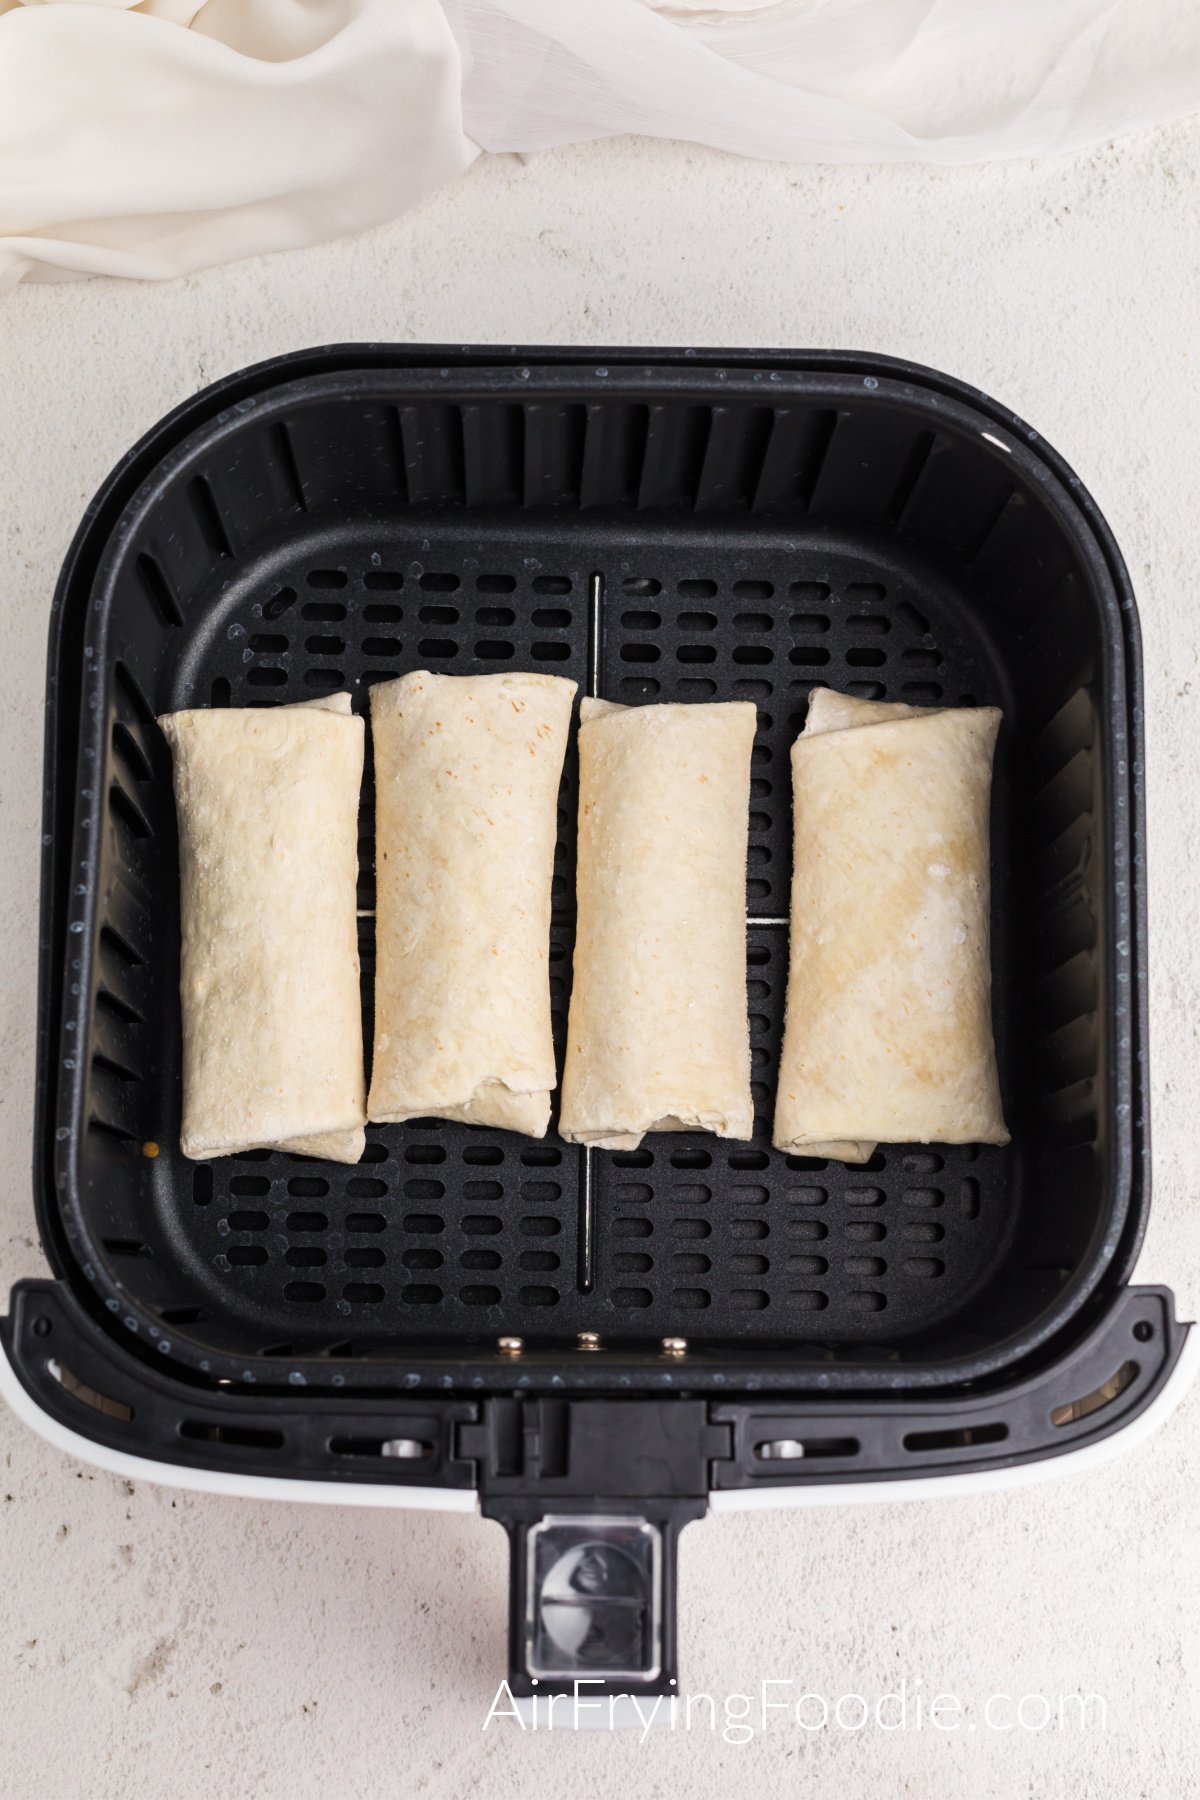 frozen burritos in a single layer in the basket of the air fryer.